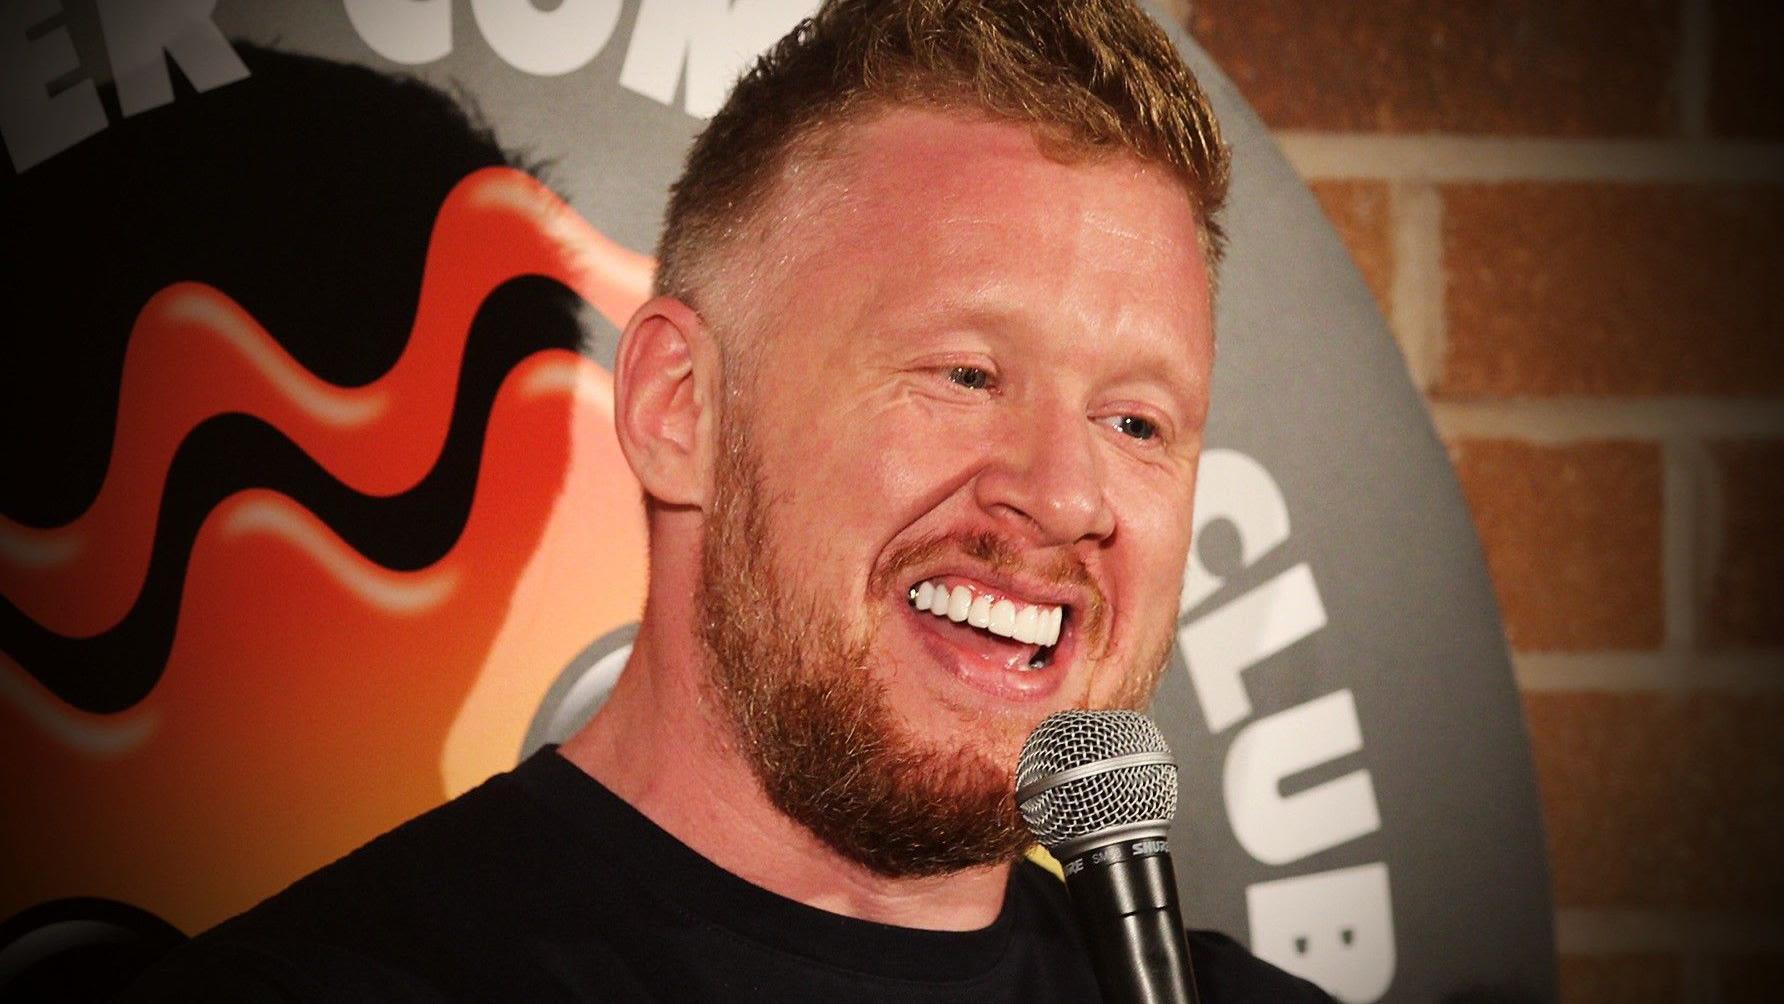 Comedian Paul Smith: From online jokes to playing arenas